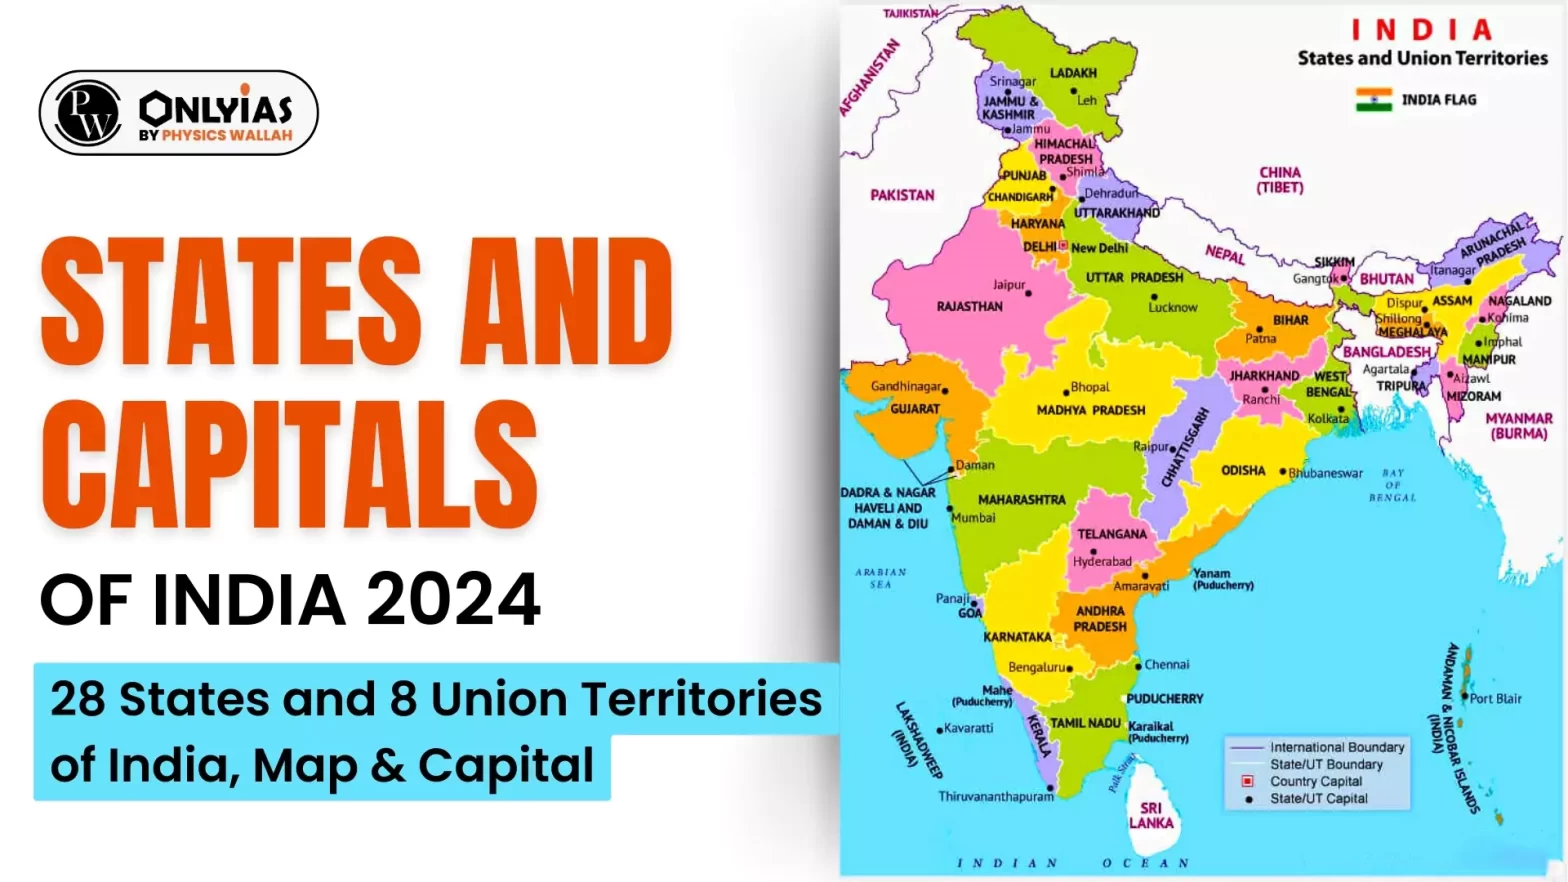 States and Capitals of India 2024: 28 States and 8 Union Territories of India, Map & Capital